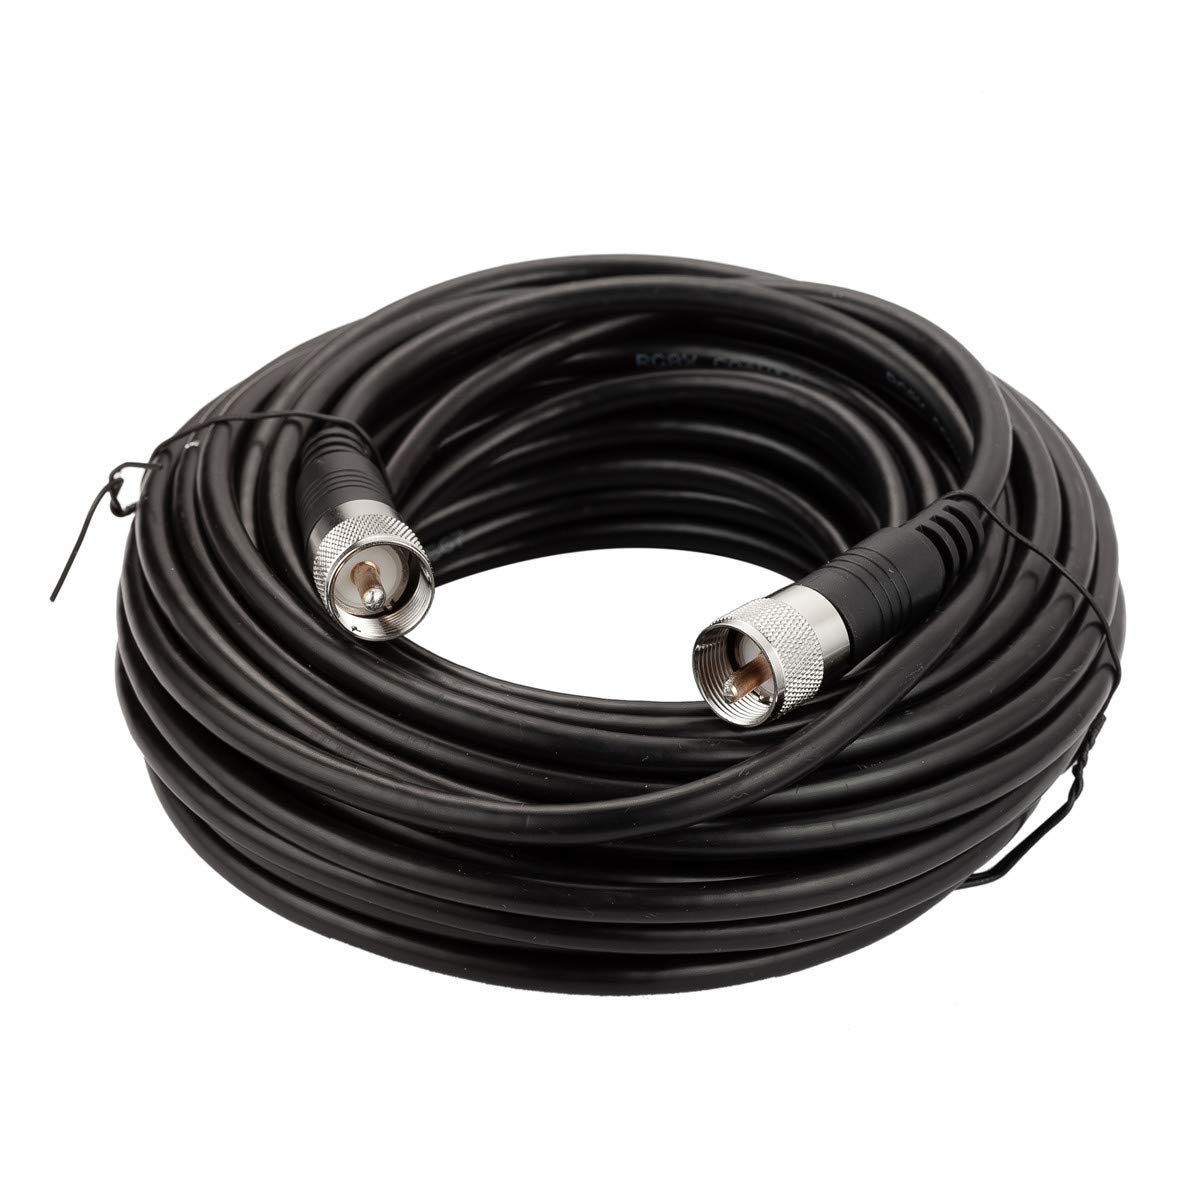 RG8x Coaxial Cable, CB Coax Cable, 50ft UHF PL259 Male [...]